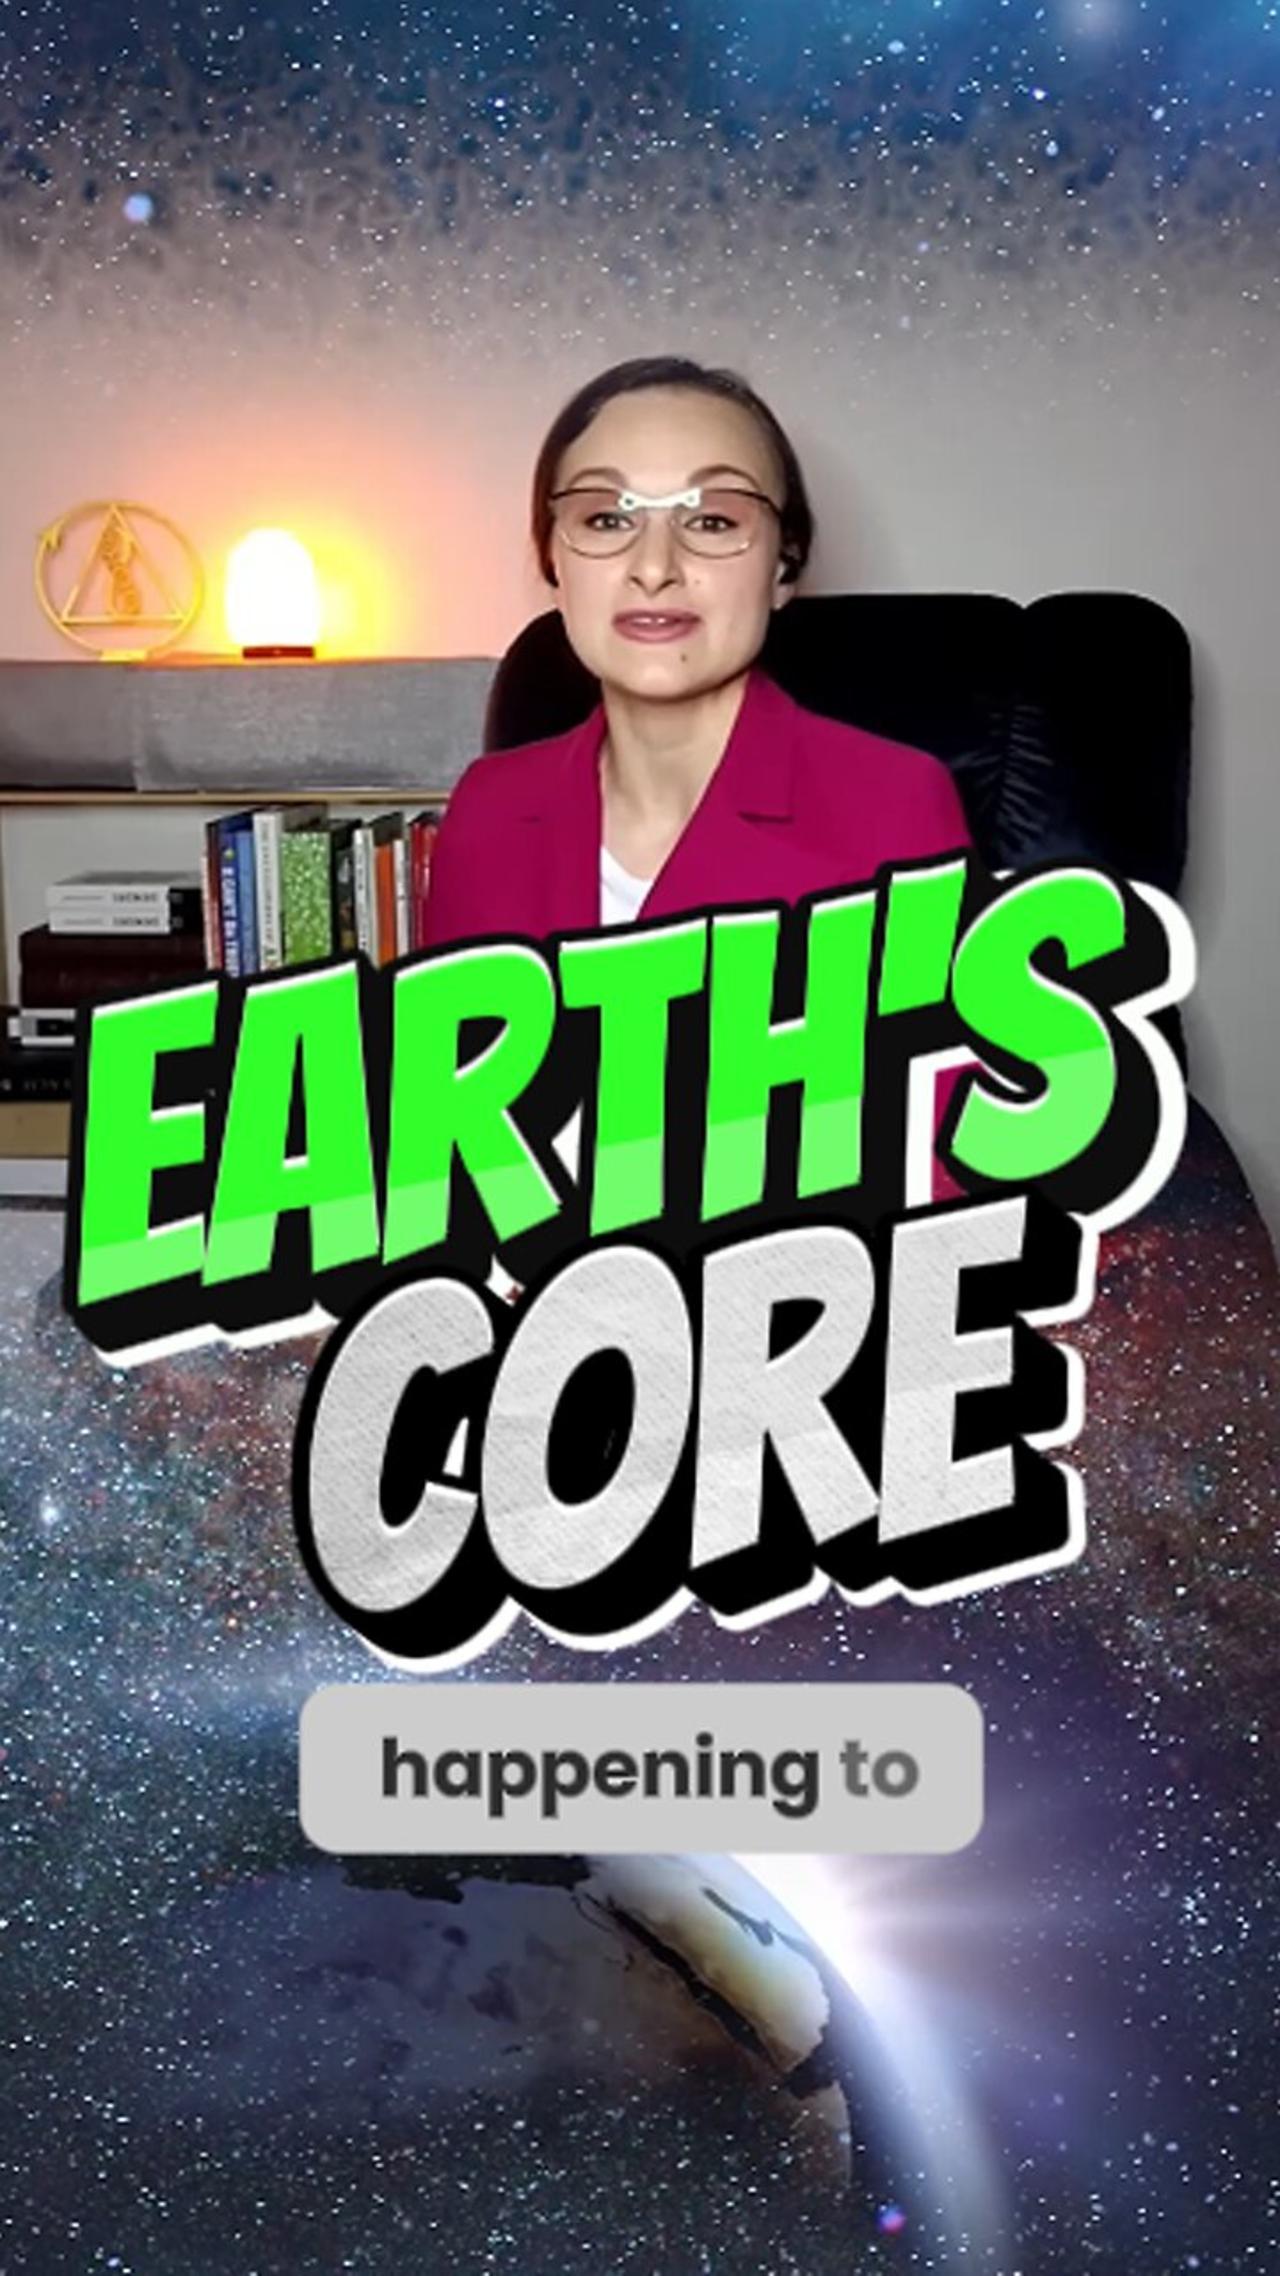 What is happening to the Earth's core, and how does it affect people's health and psyche?